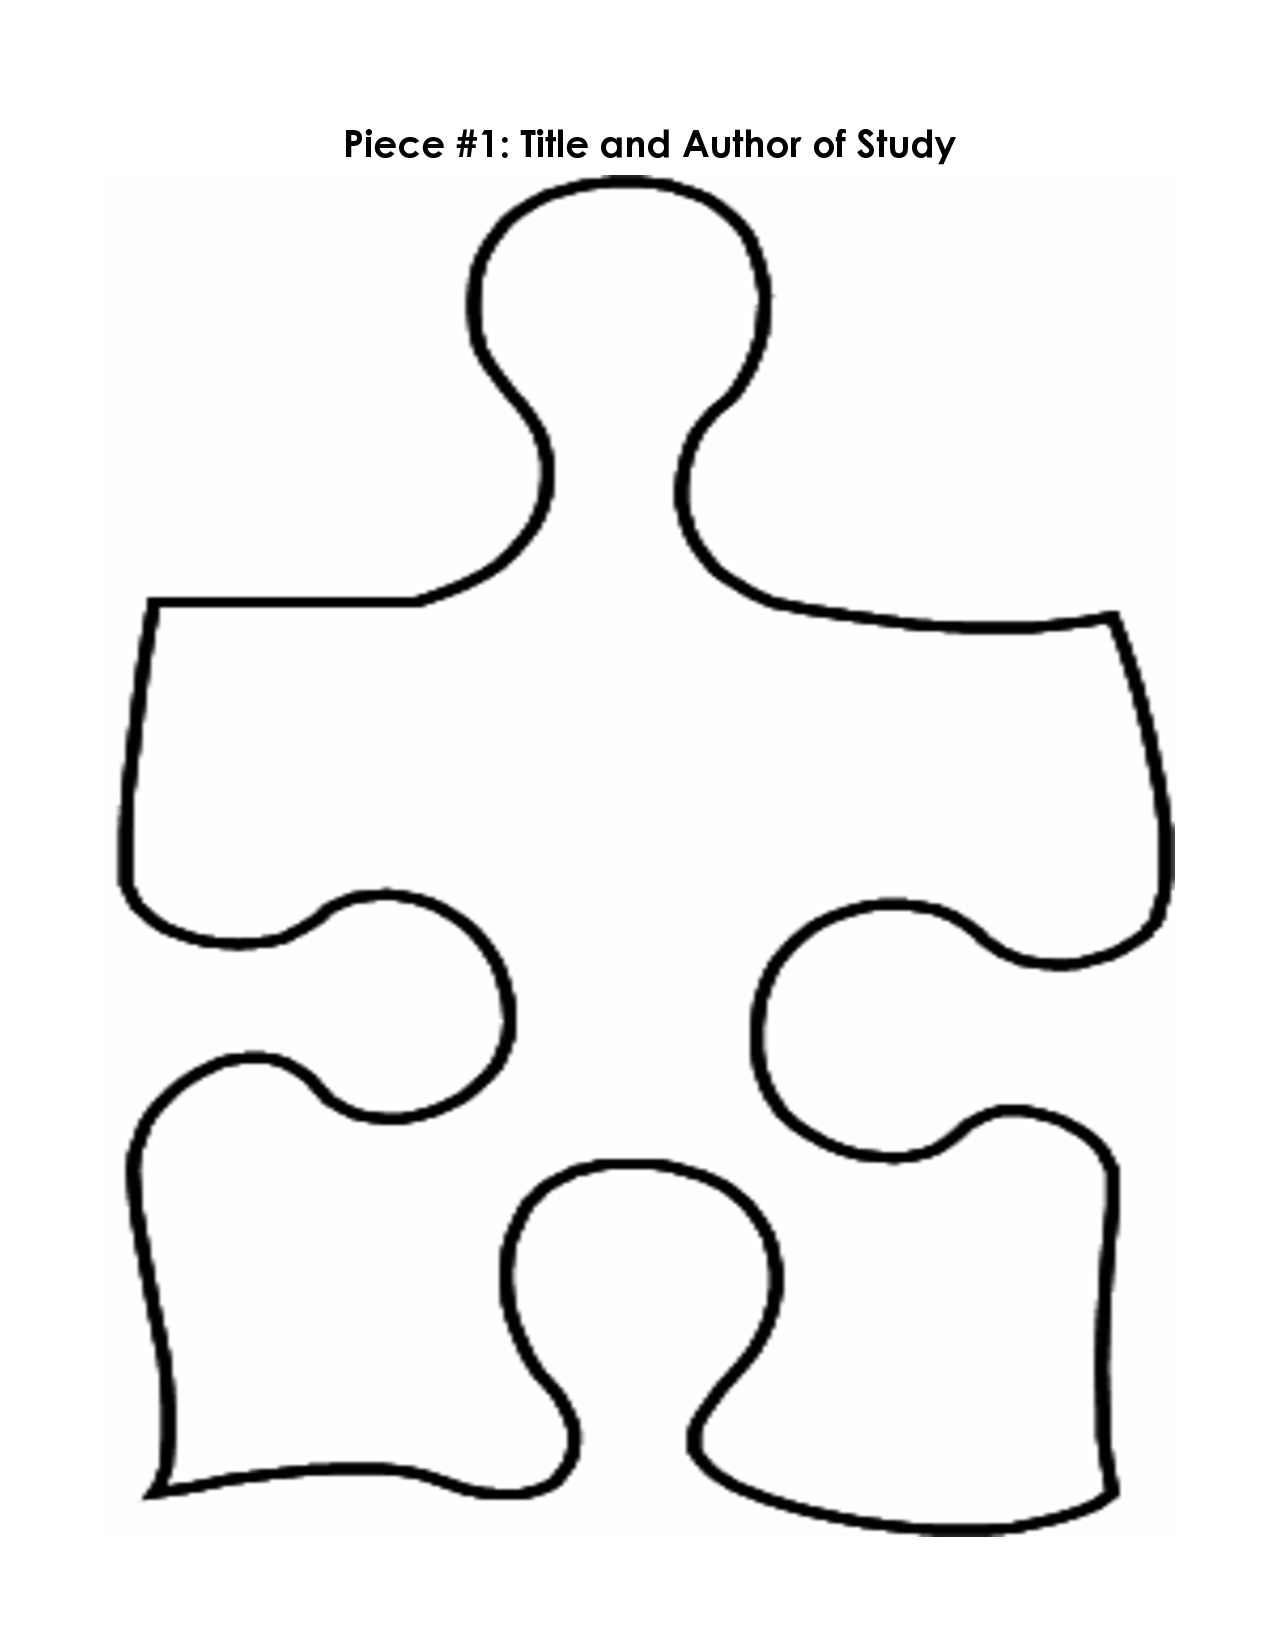 Free Puzzle Pieces Template, Download Free Clip Art, Free Clip Art - Printable 2 Piece Puzzles